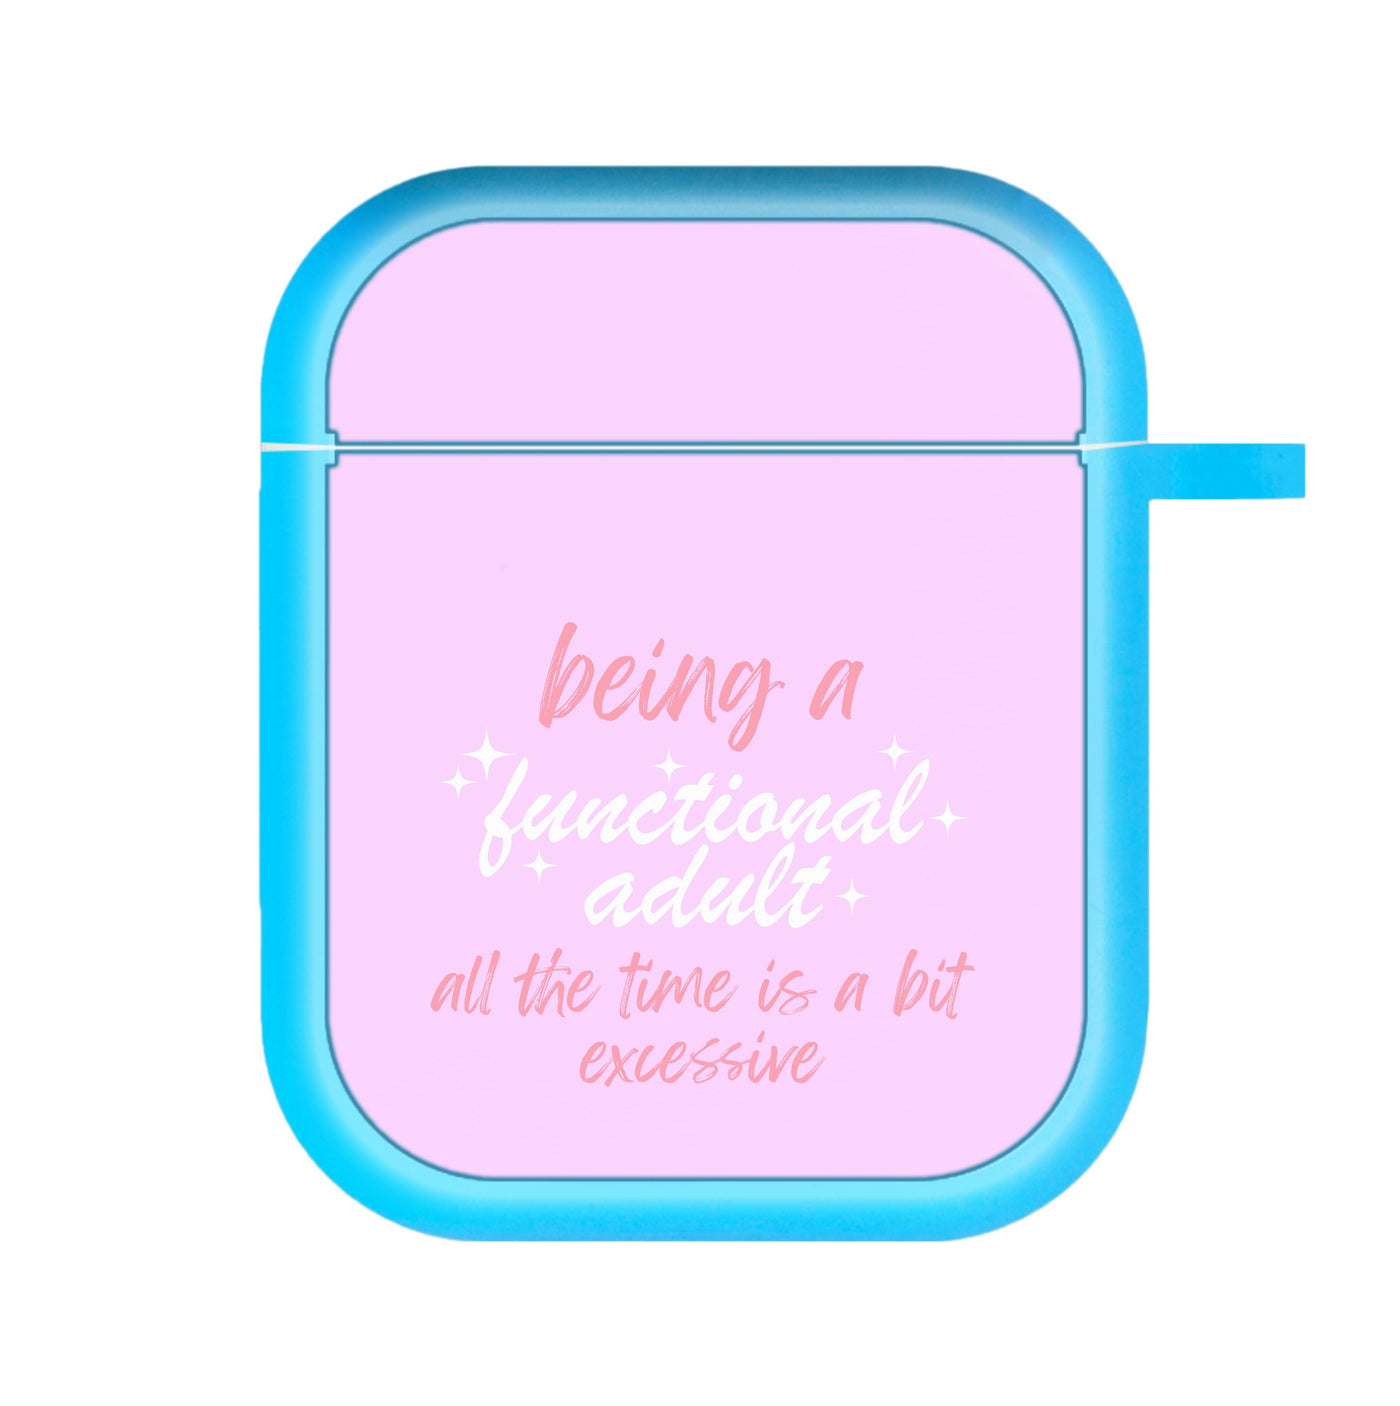 Being A Functional Adult - Aesthetic Quote AirPods Case